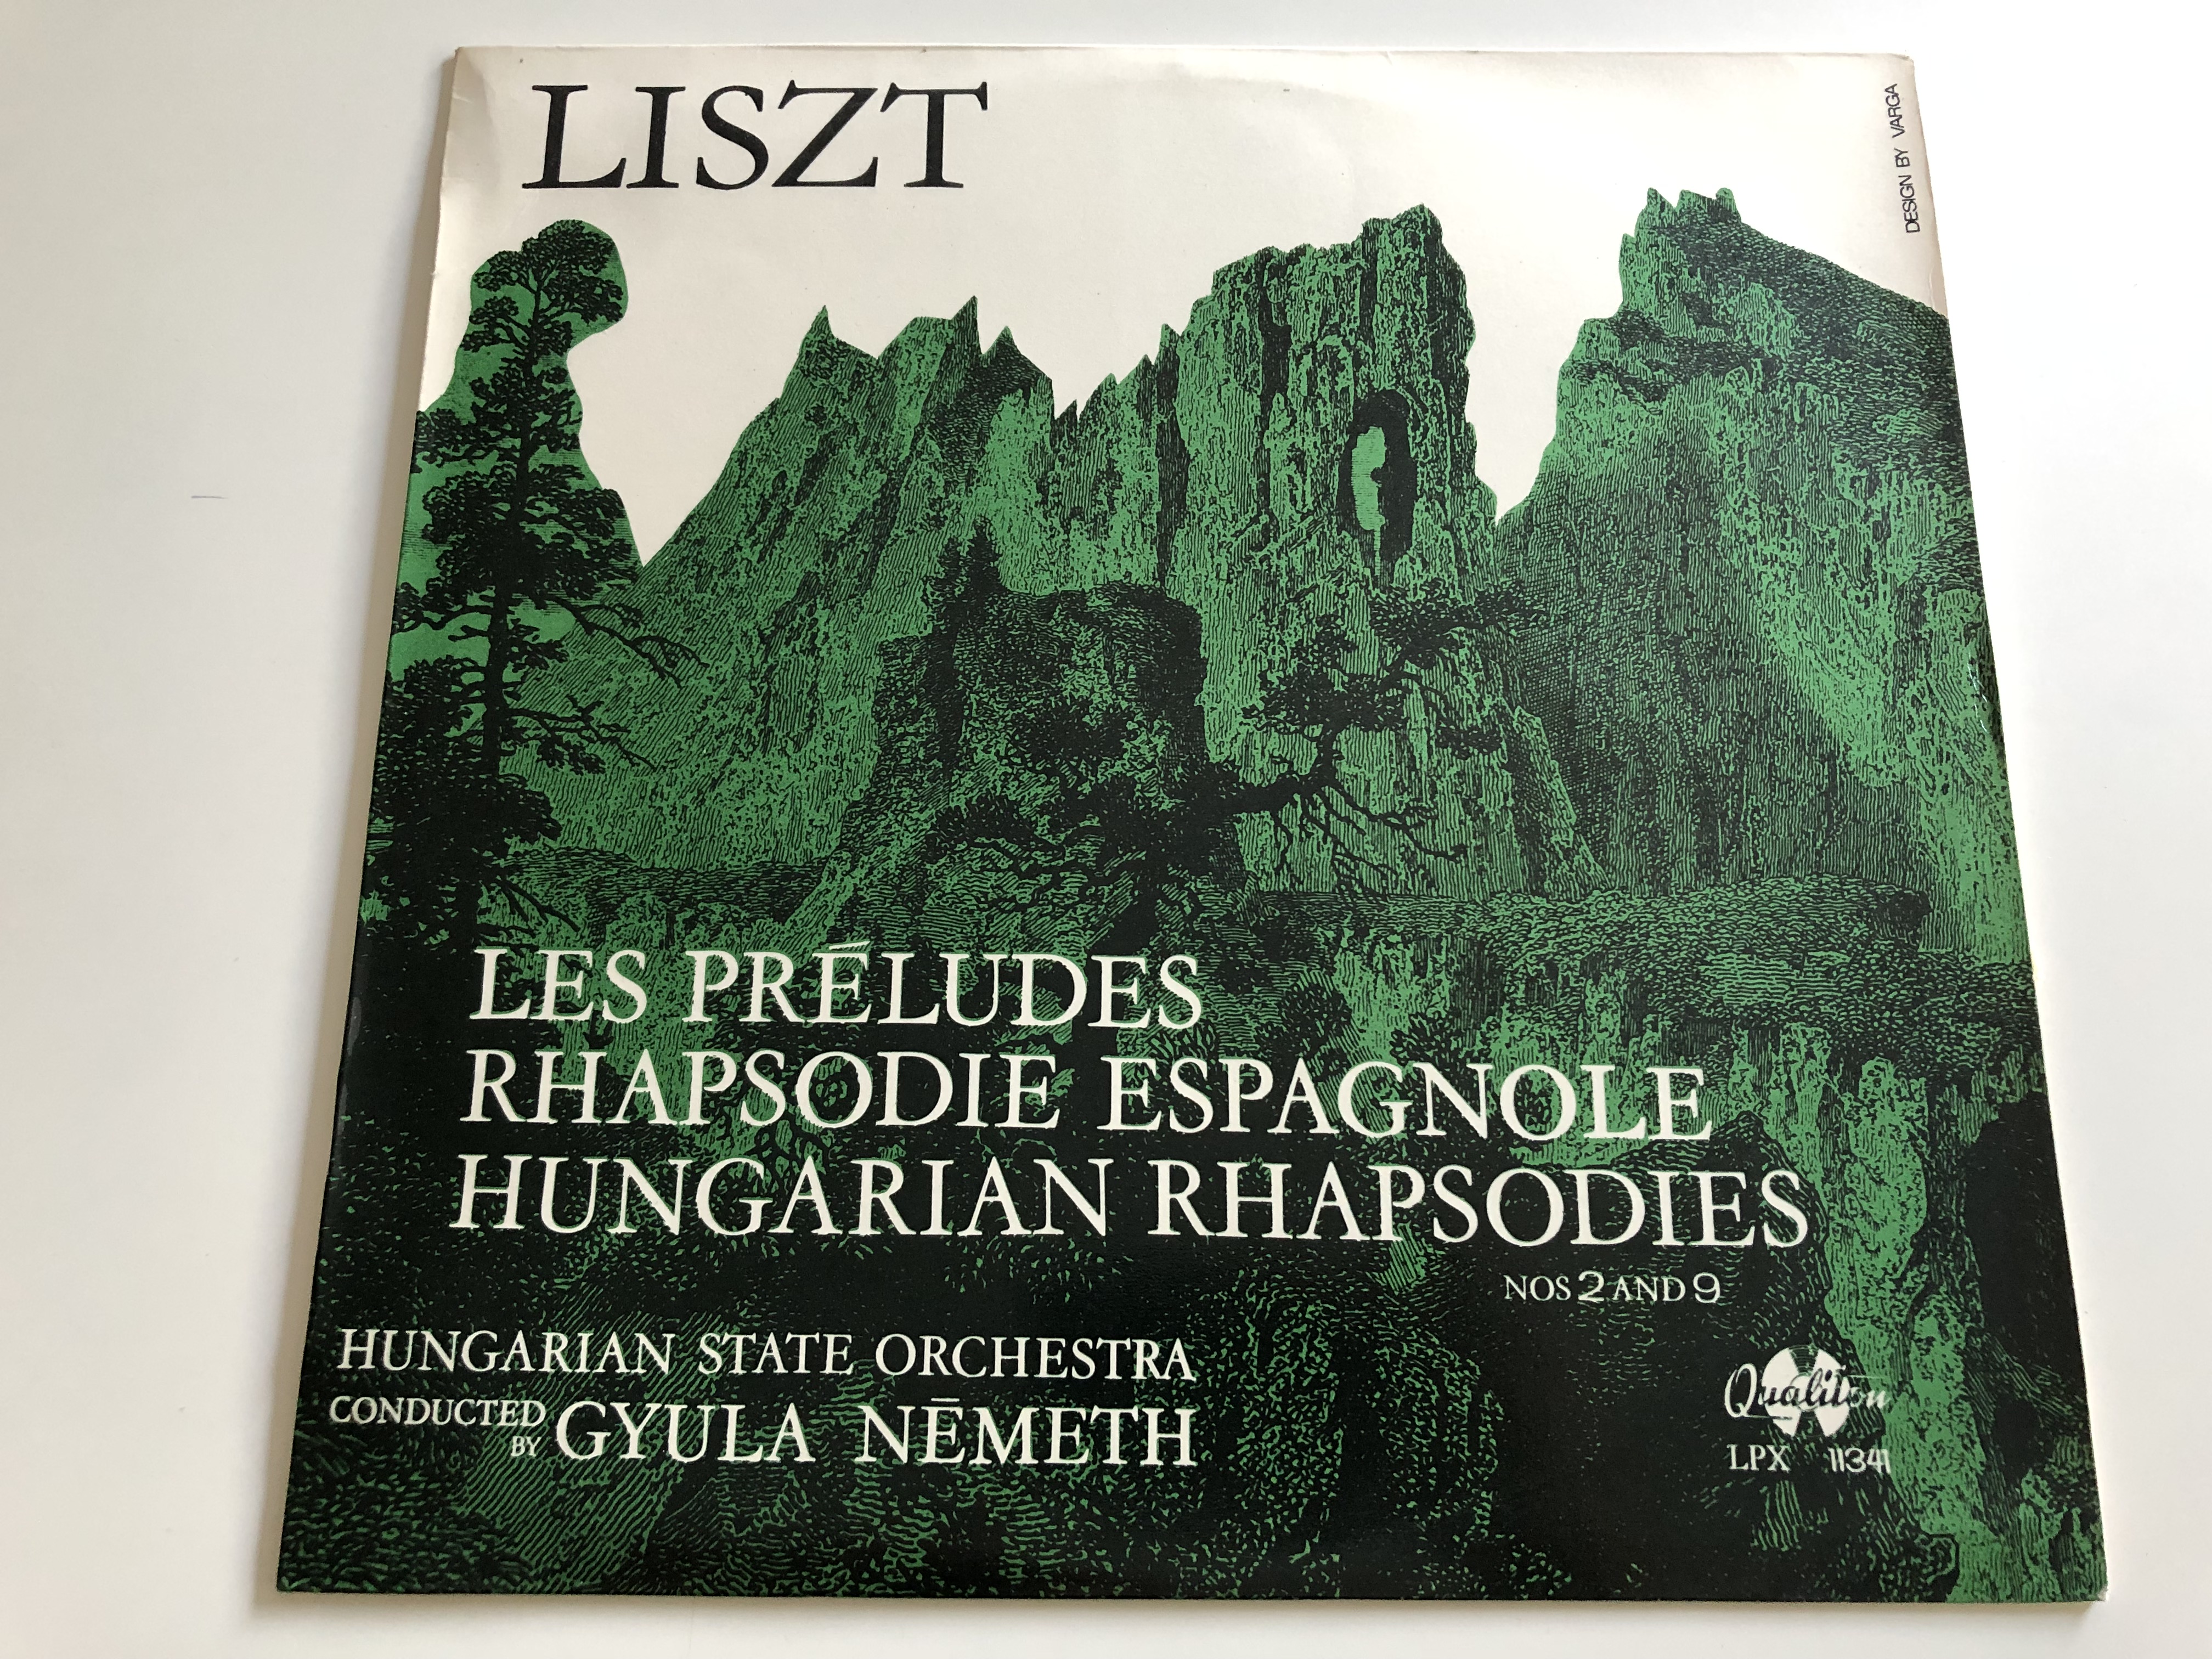 liszt-les-pr-ludes-rhapsodie-espagnole-hungarian-rhapsodies-nos-2-and-9-hungarian-state-orchestra-conducted-gyula-n-meth-qualiton-lp-stereo-mono-lpx-11341-1-.jpg